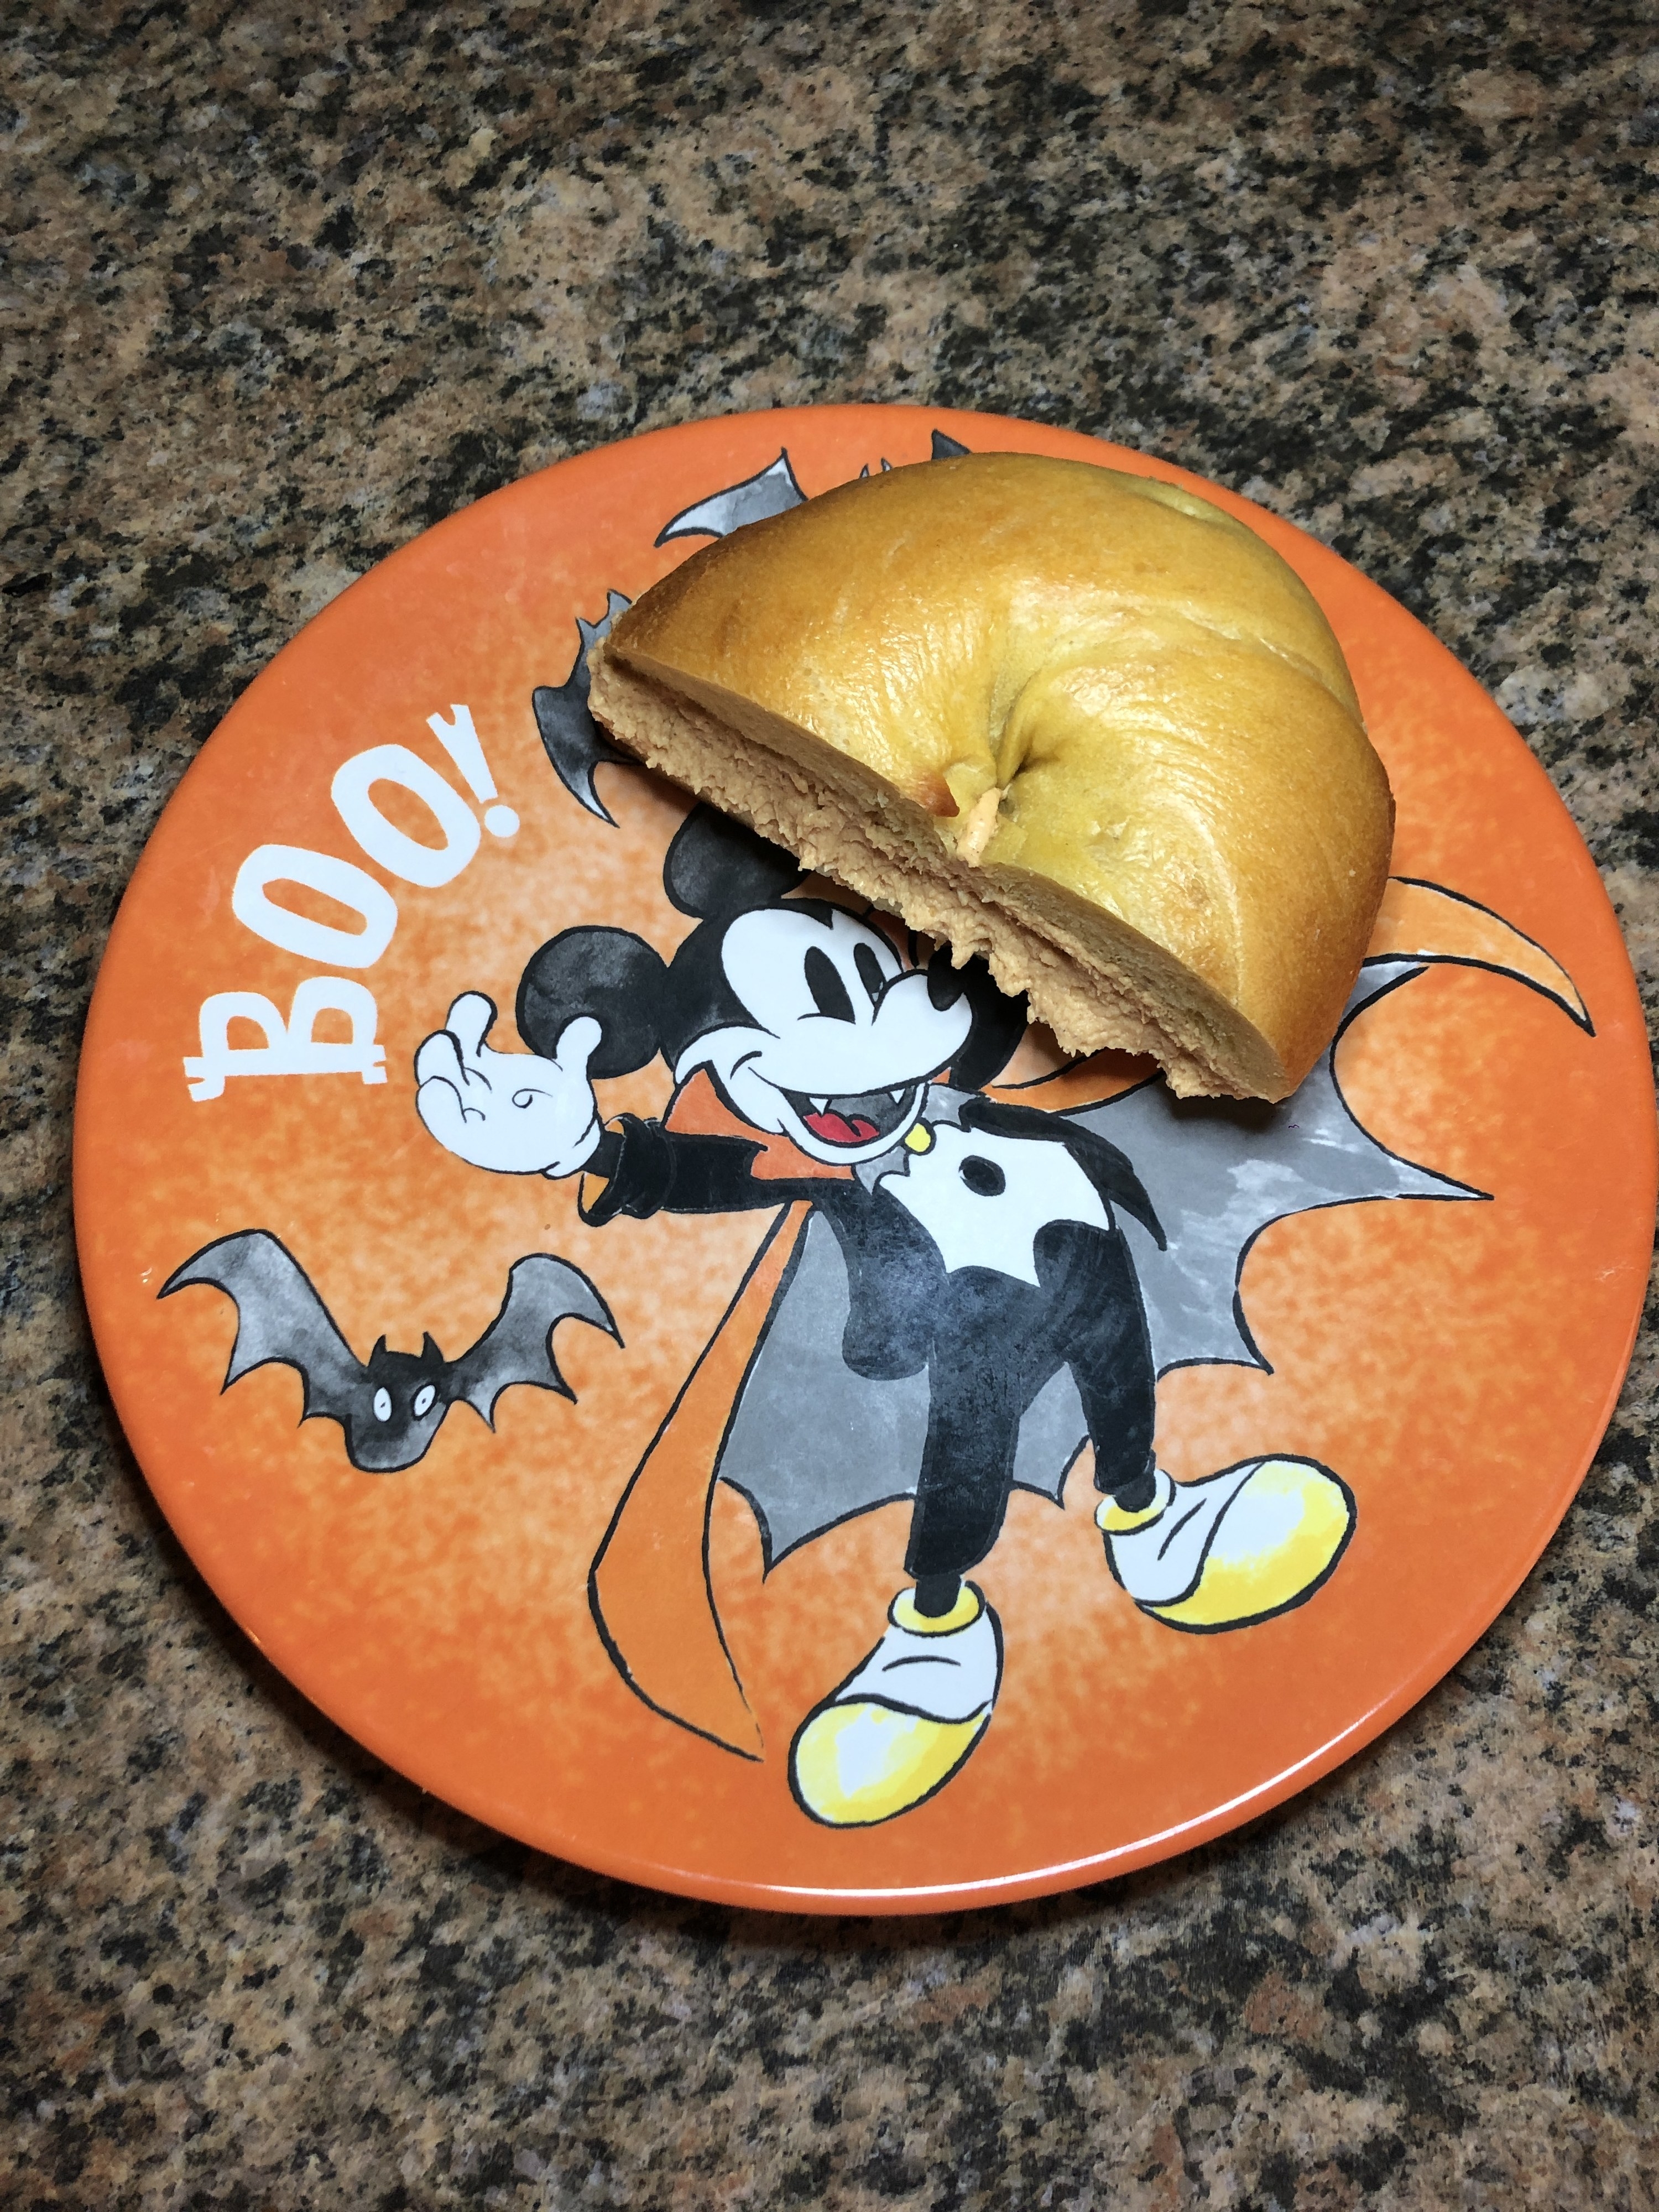 buzzfeed editor&#x27;s orange plate with vampire mickey on it and a bagel